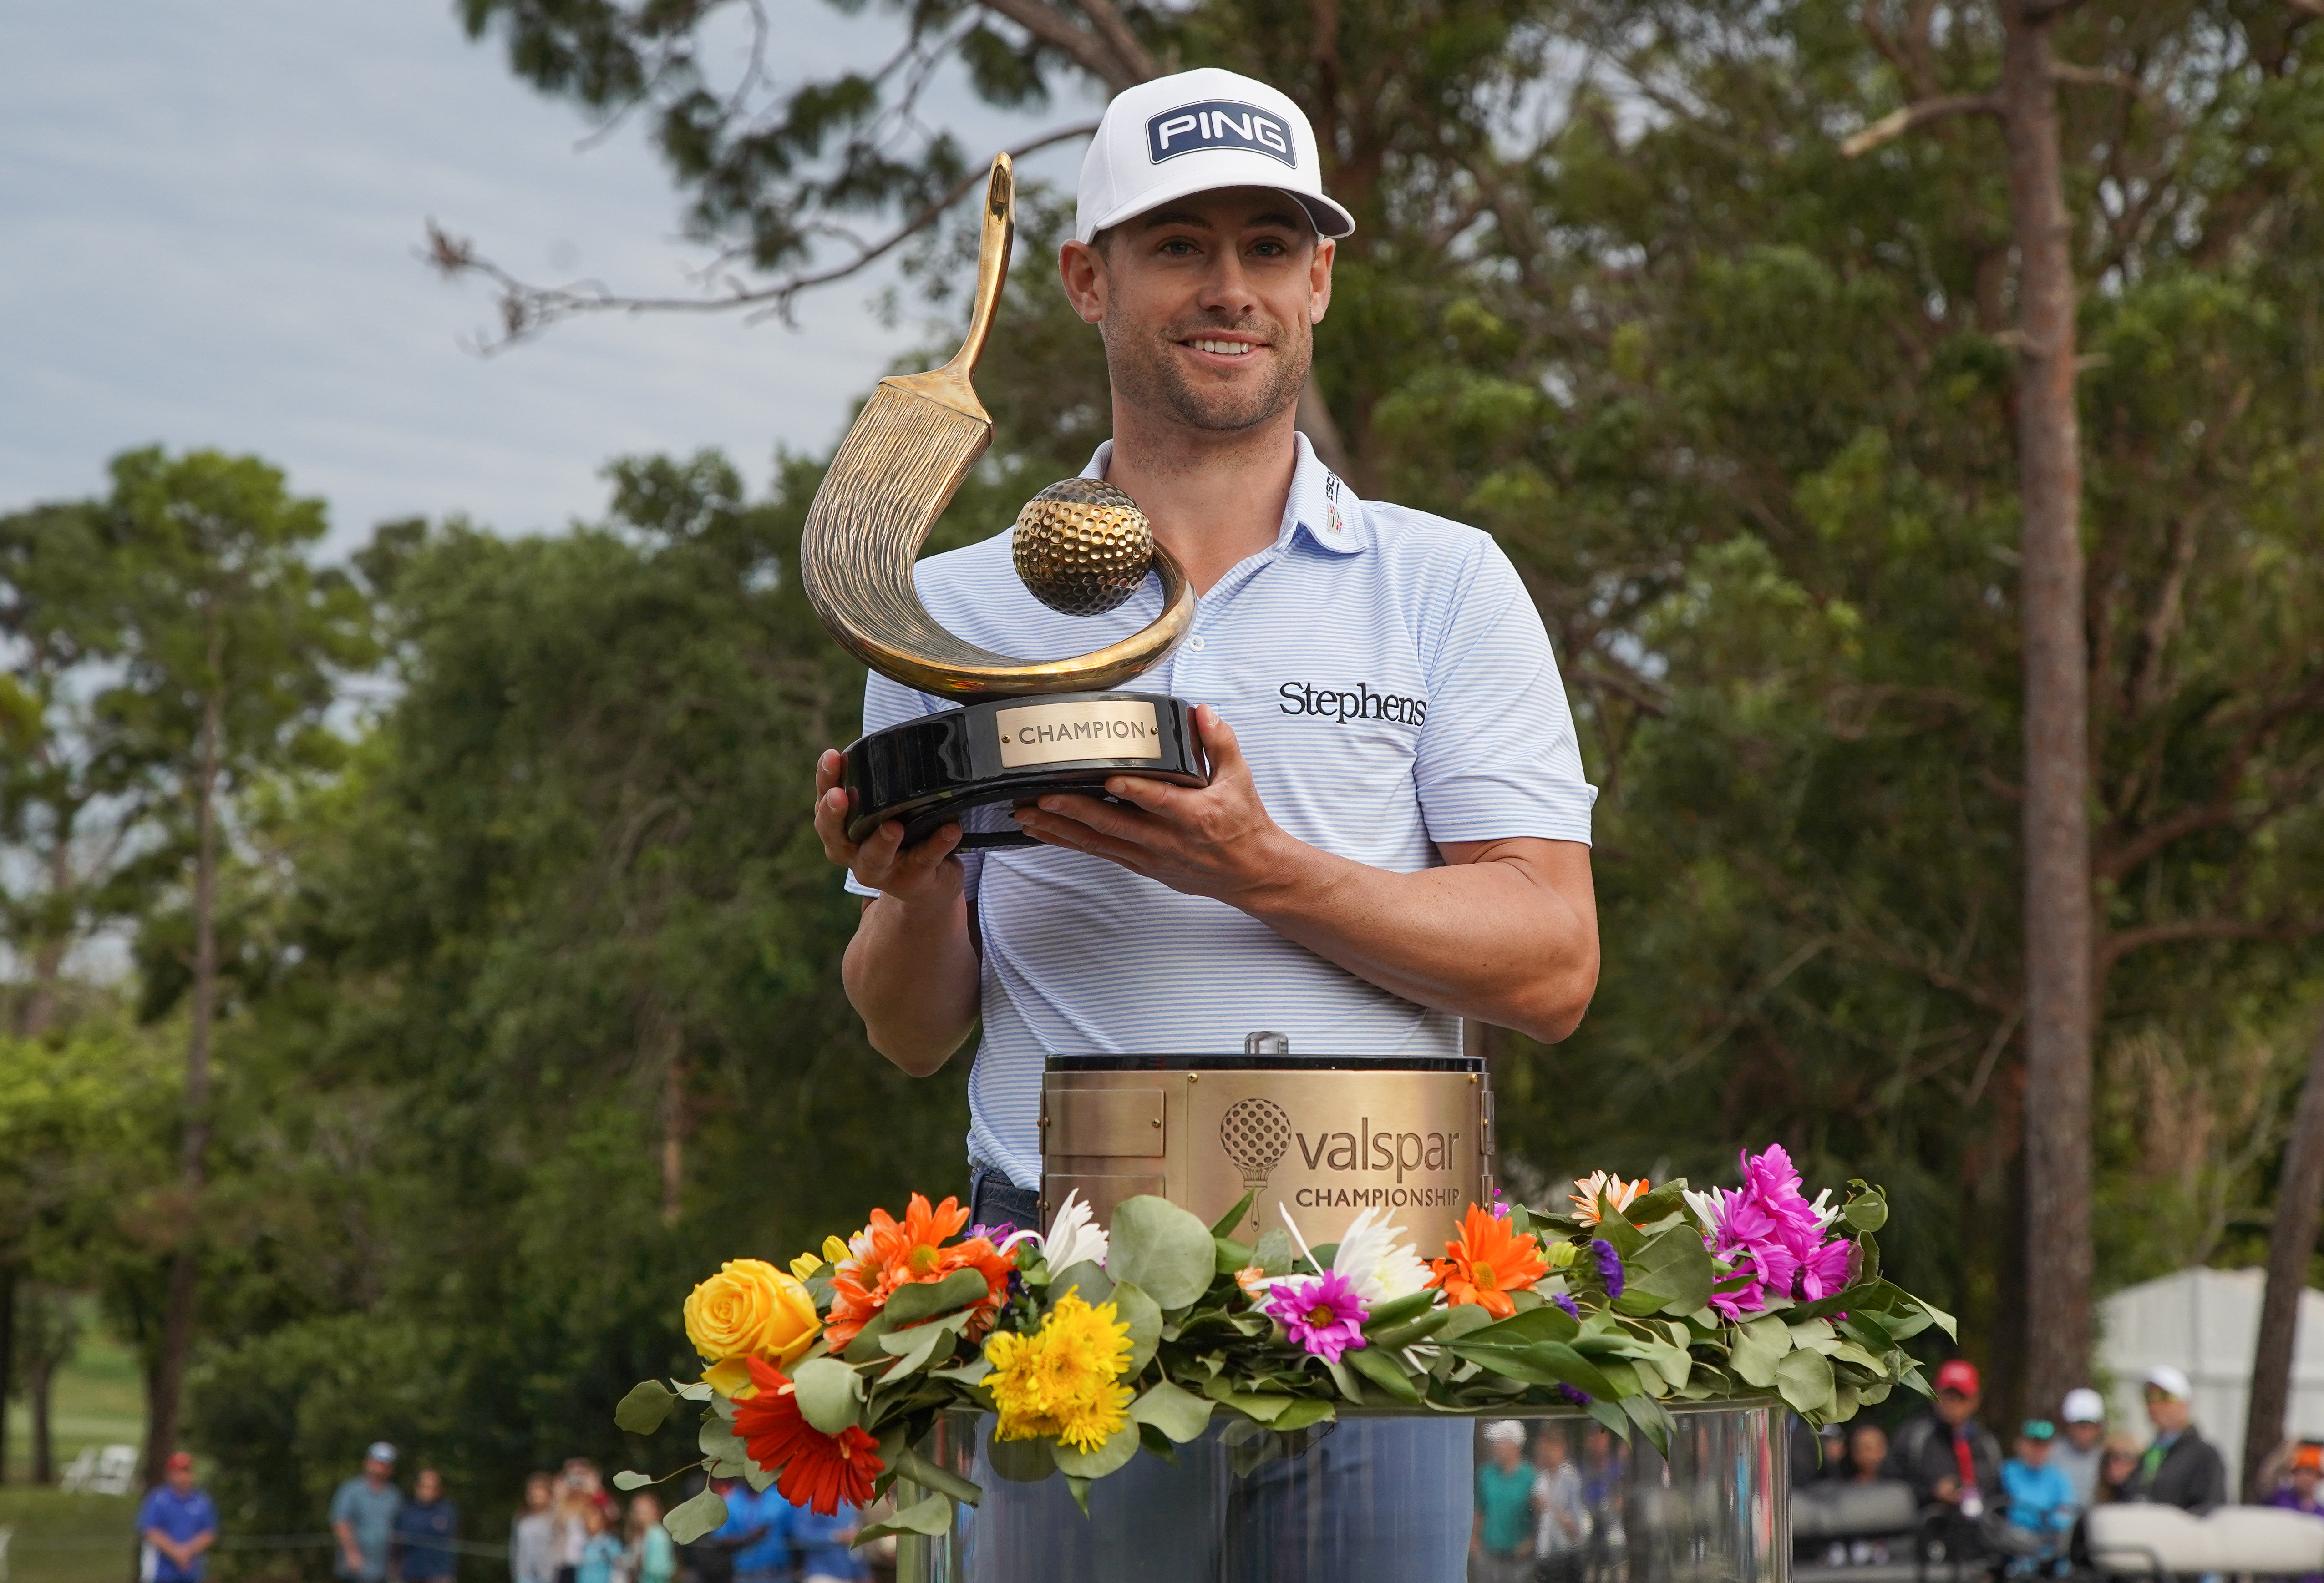 Taylor Moore is the surprise winner of the Valspar Championship